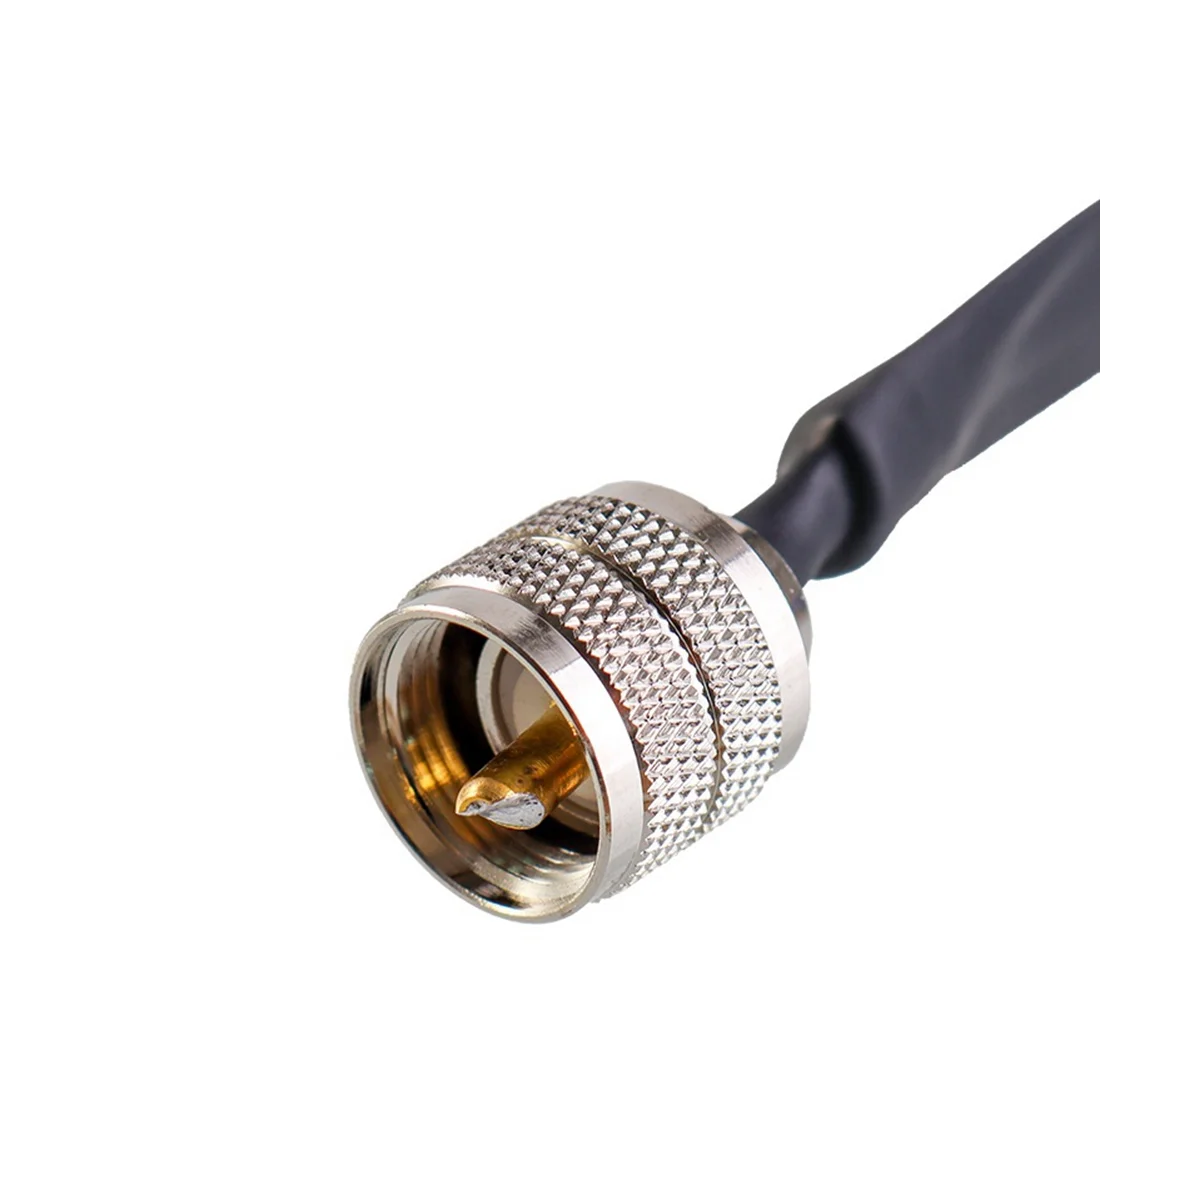 Window/Door Pass Through Flat RF Coaxial Cable SO239 UHF Female to UHF Female 50 Ohm RF Coax Pigtail Extension Cord,40cm images - 6